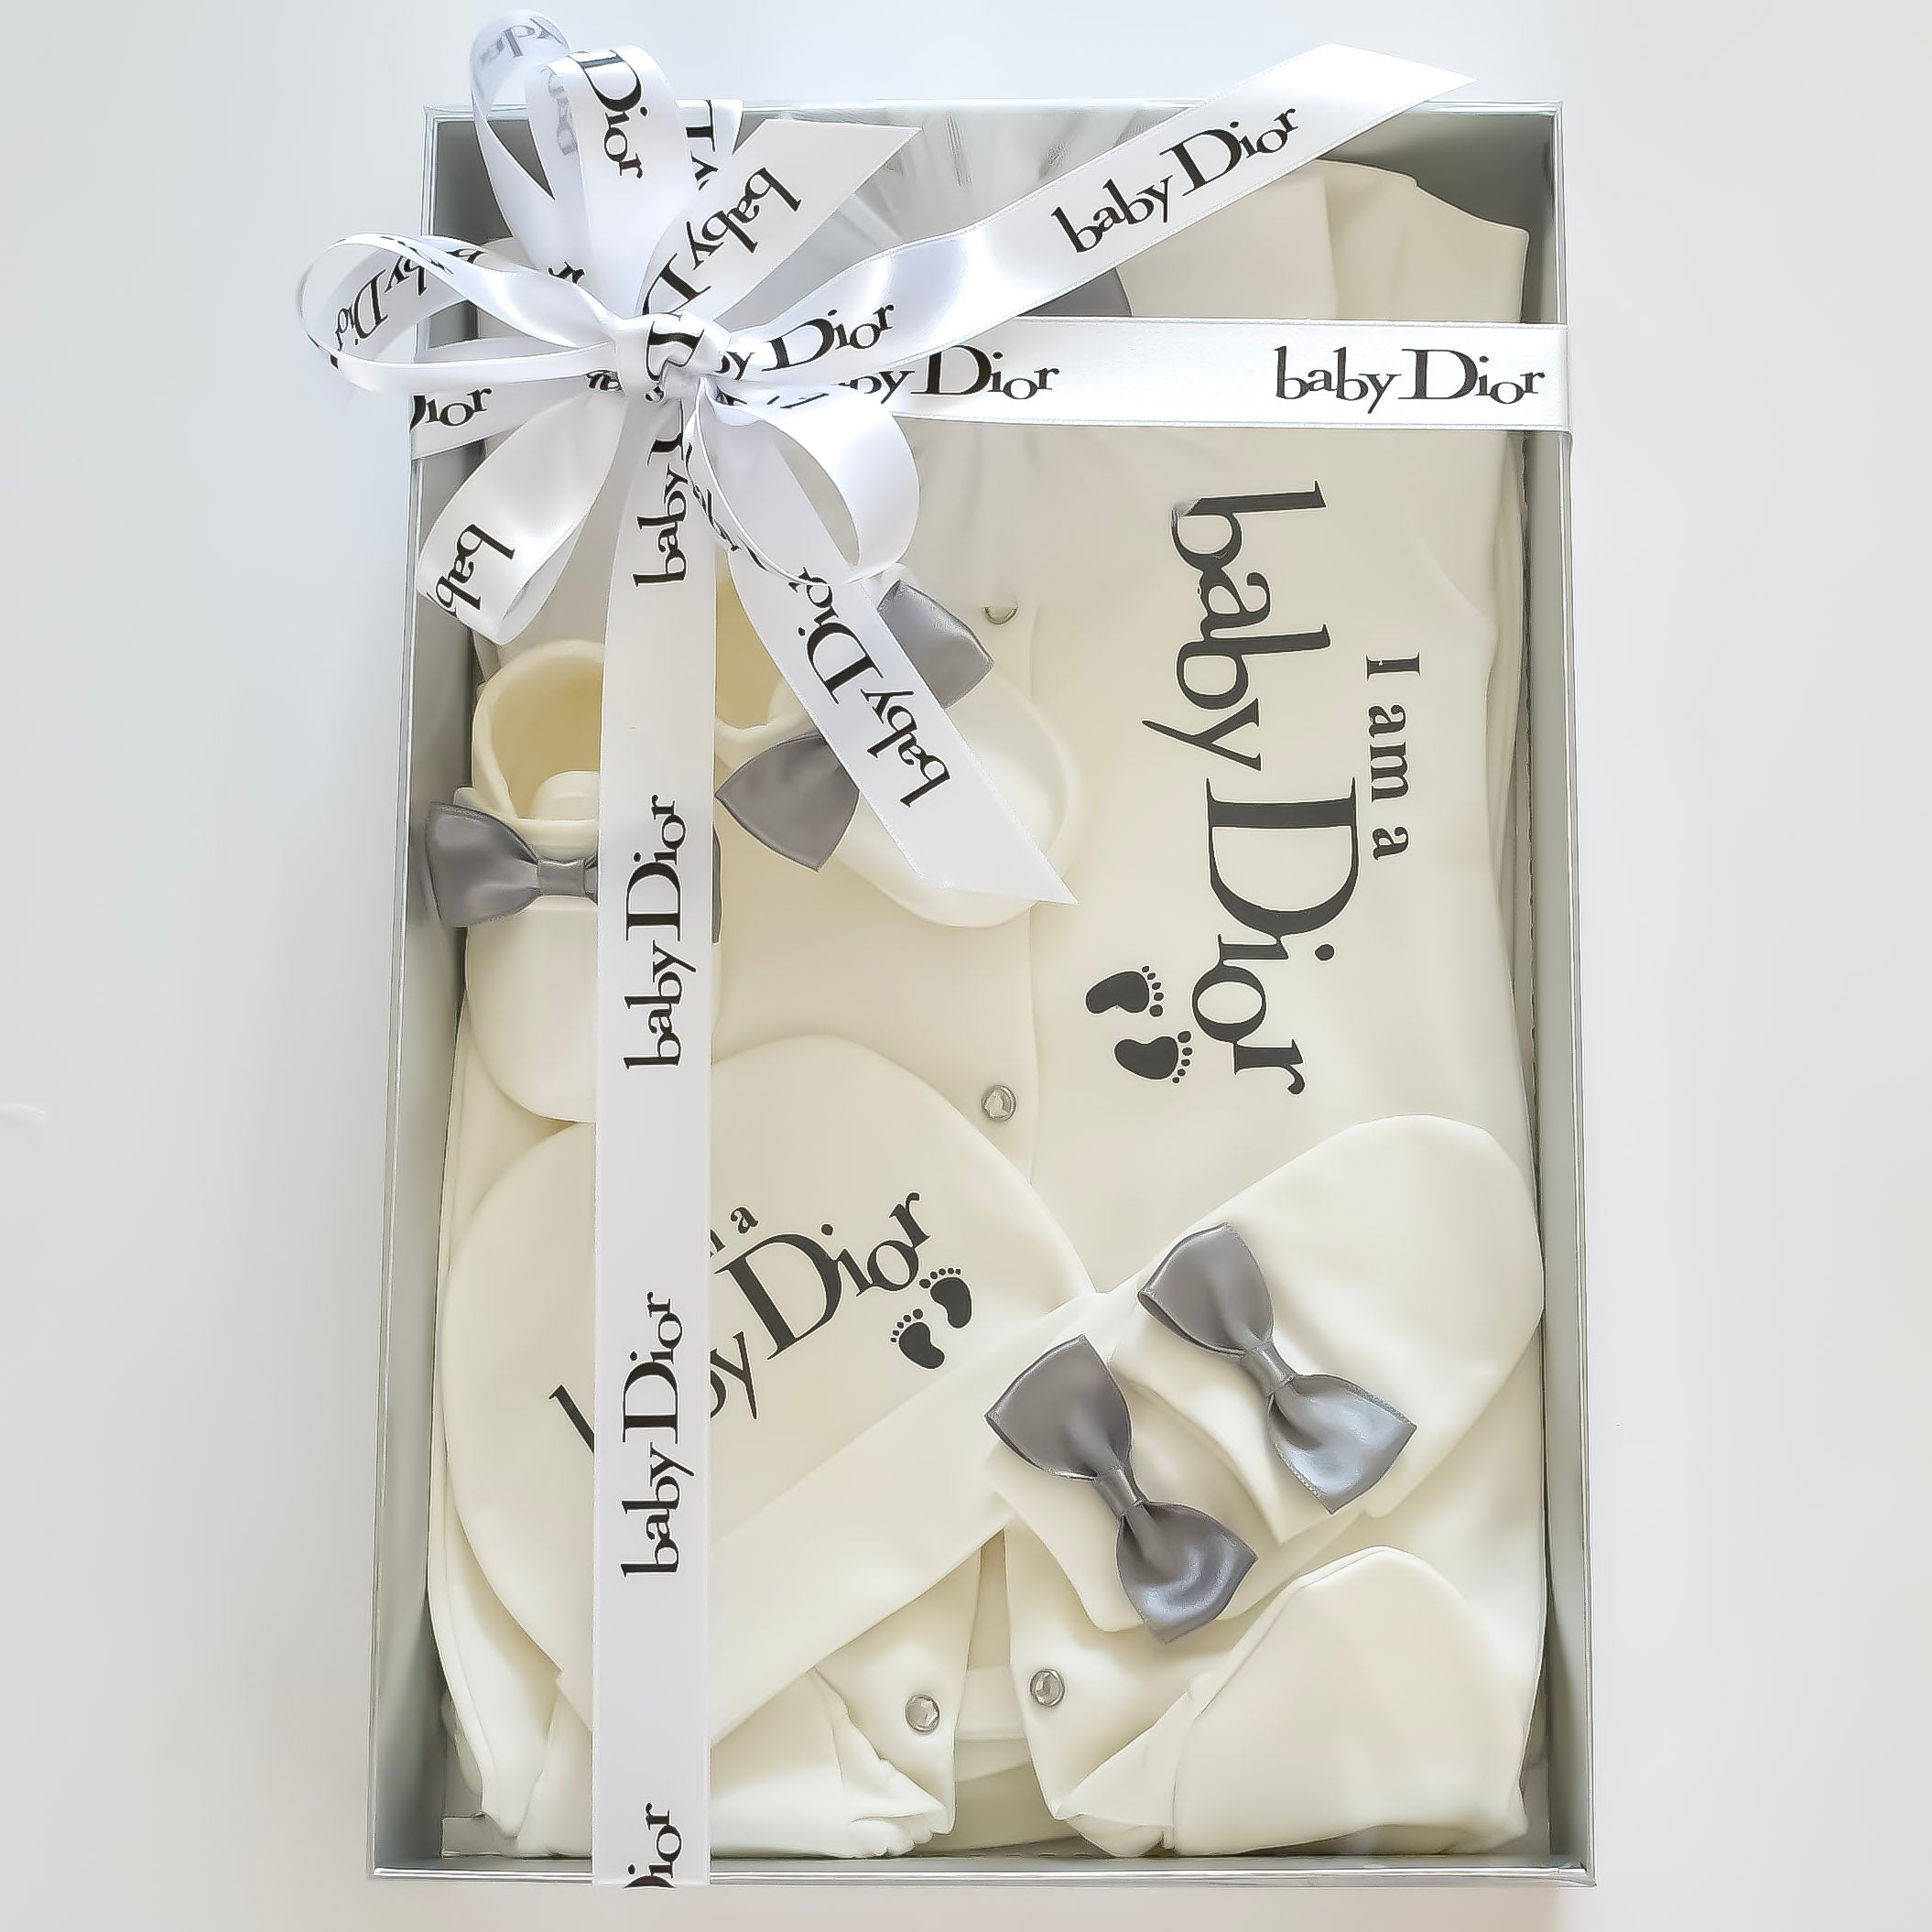 dior baby gifts